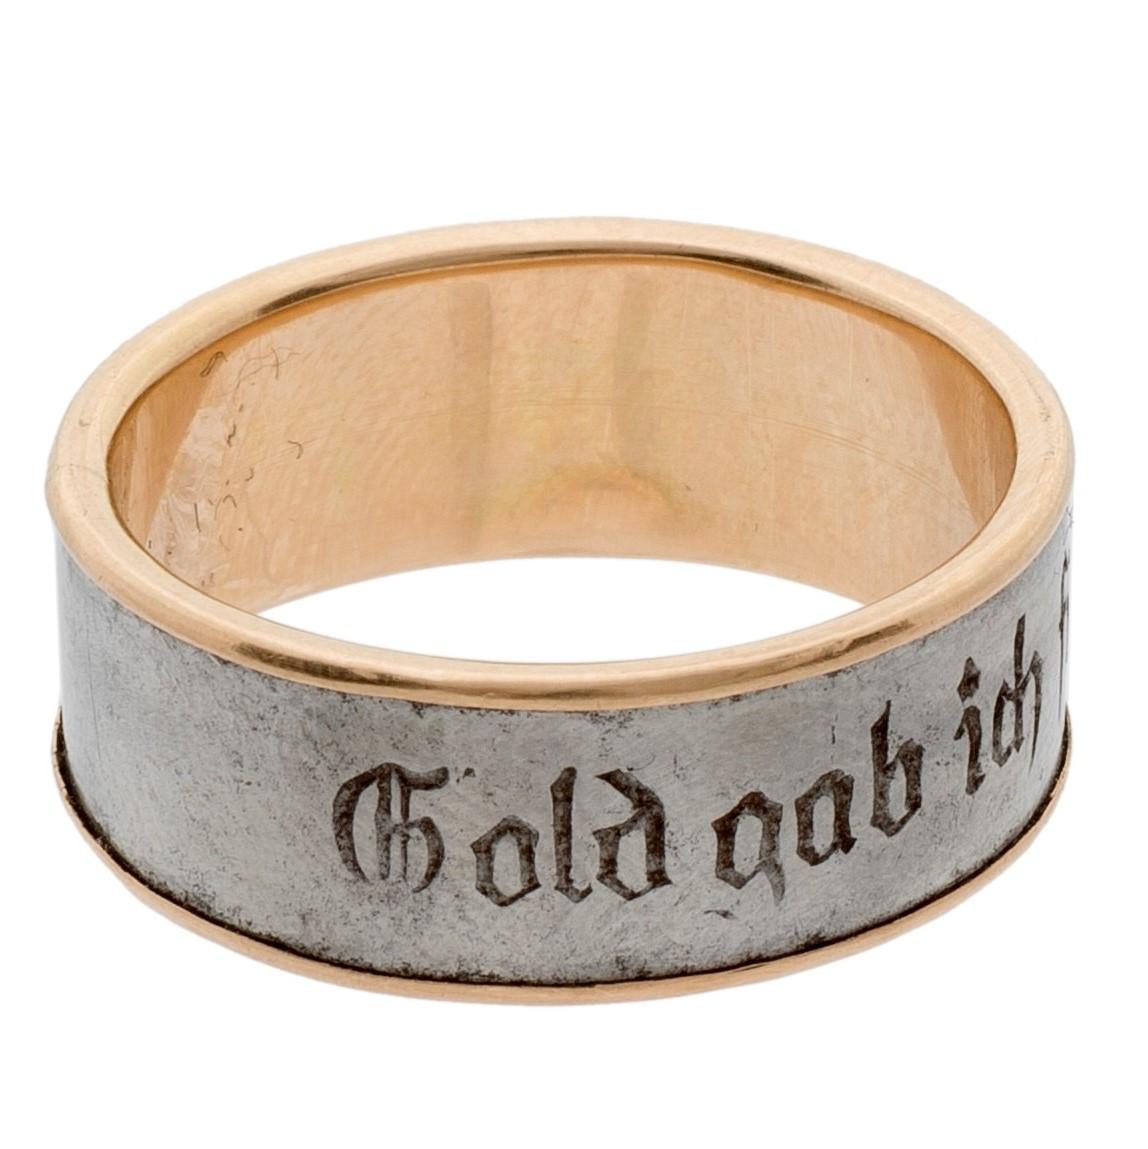 First World War (or Patriotic) Iron Ring with Inscription “Gold gab ich für Eisen”
Austro-Hungarian Empire, circa 1919
Gold and Iron
Outer diameter 21 mm., width of band 8 mm.
Weight 4 gr., US size 7, UK size O

Just as wedding rings mark the